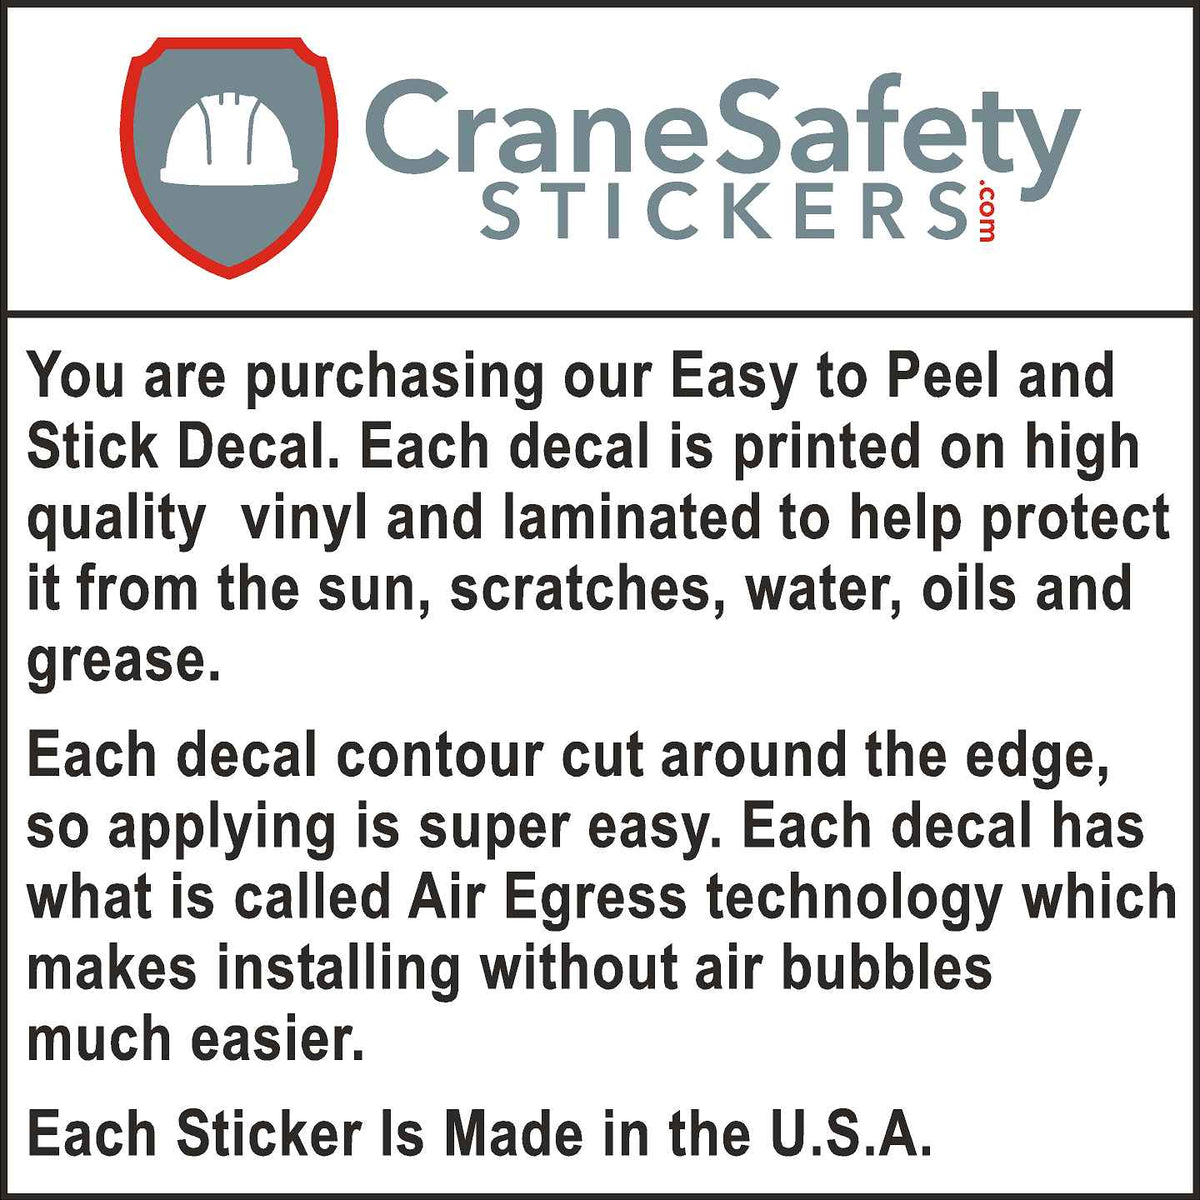 Quality of our orange and black accident free two year sticker.